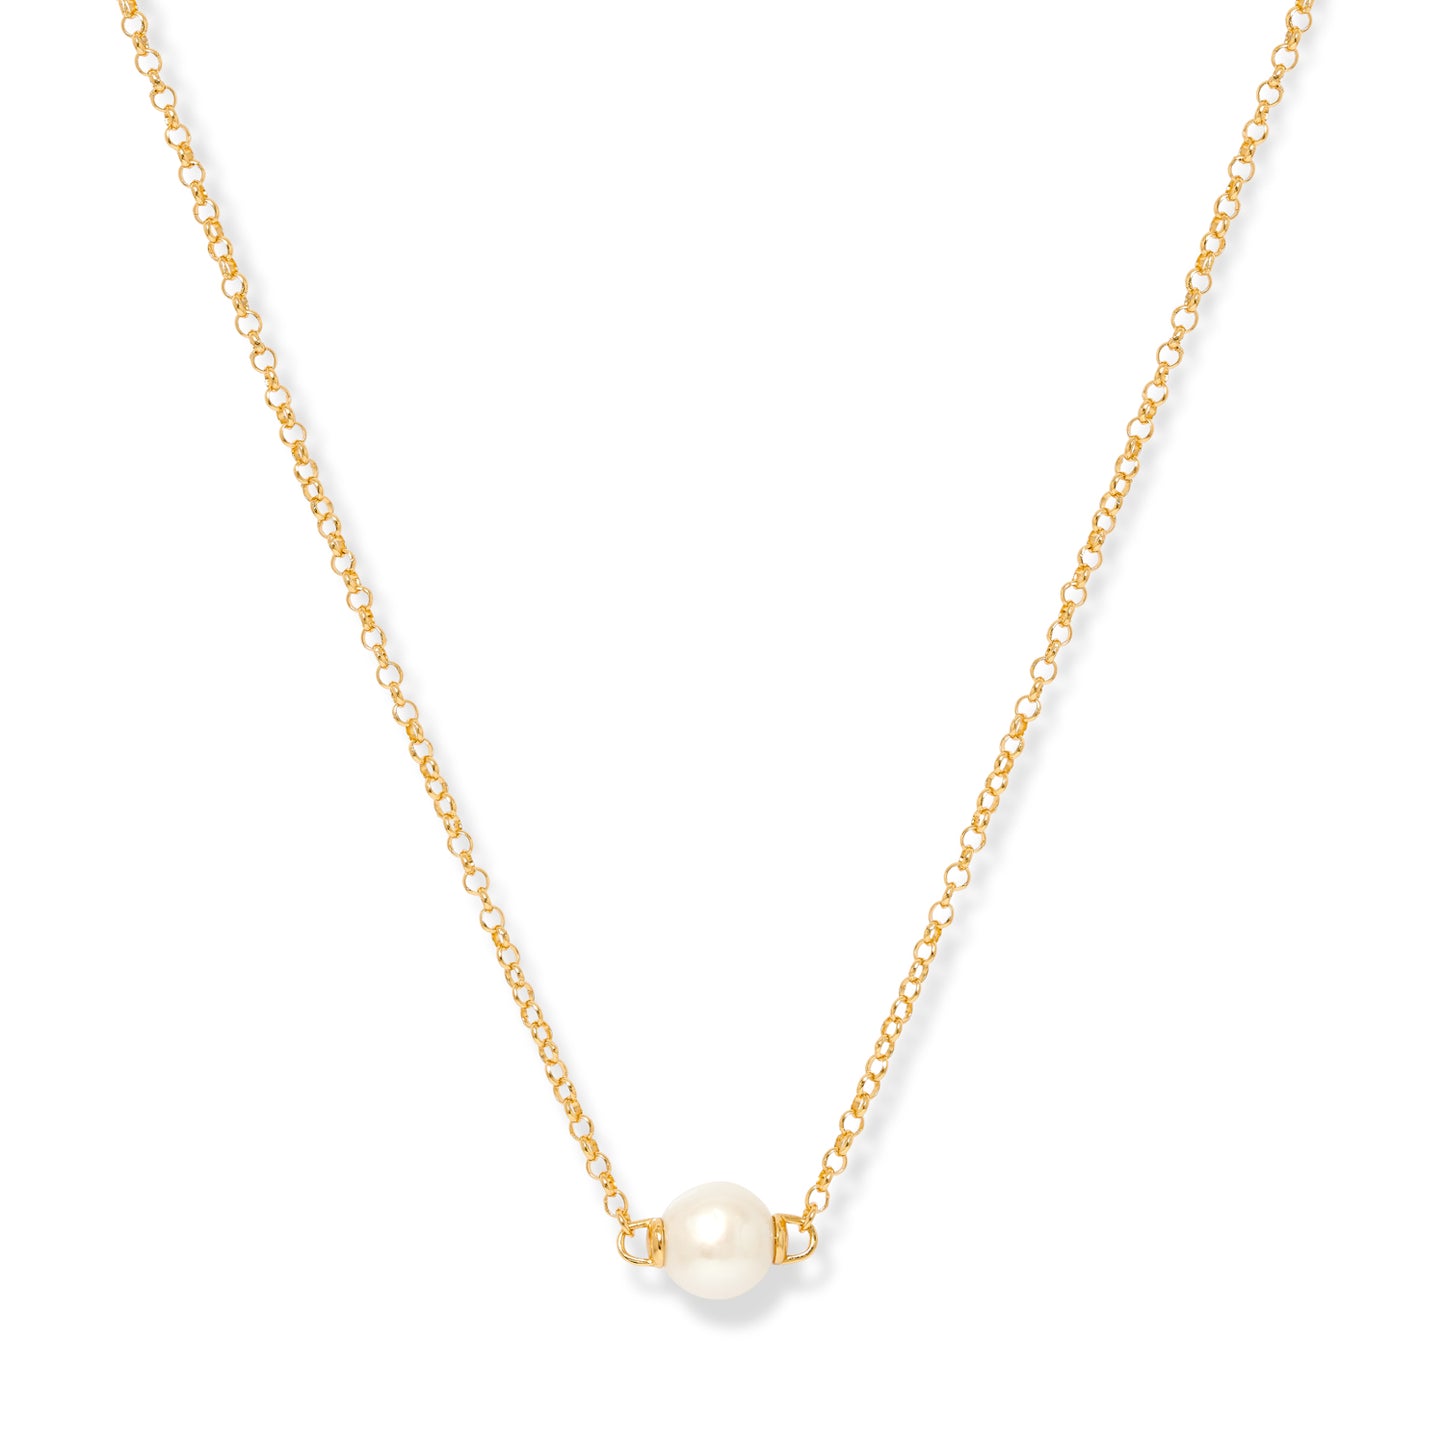 Credo large cultured freshwater pearl pendant on gold cable chain